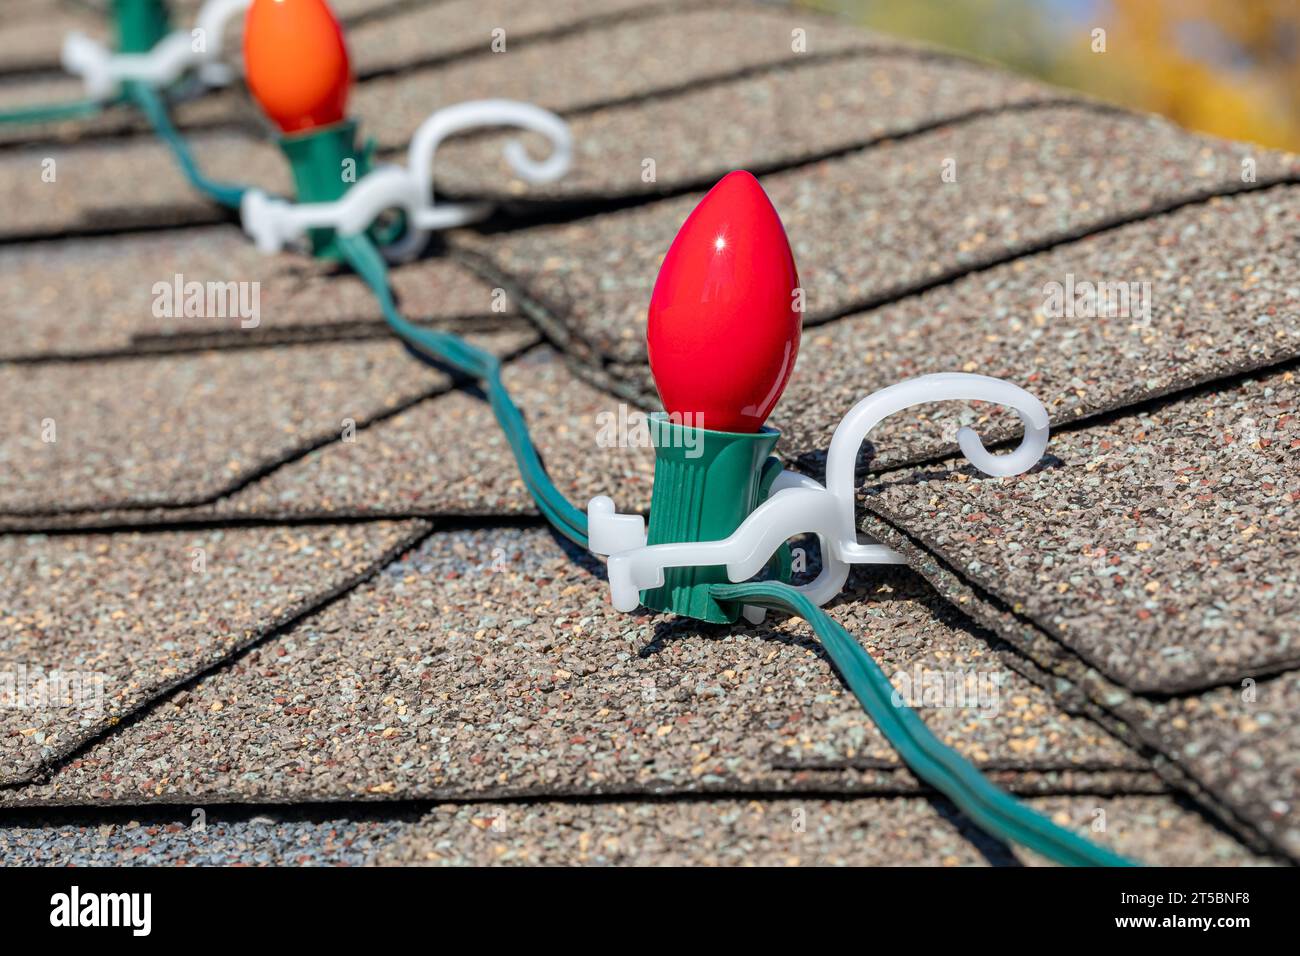 Hanging Christmas string lights on shingles of roof. Holiday decorating safety, lighting and accident prevention concept. Stock Photo